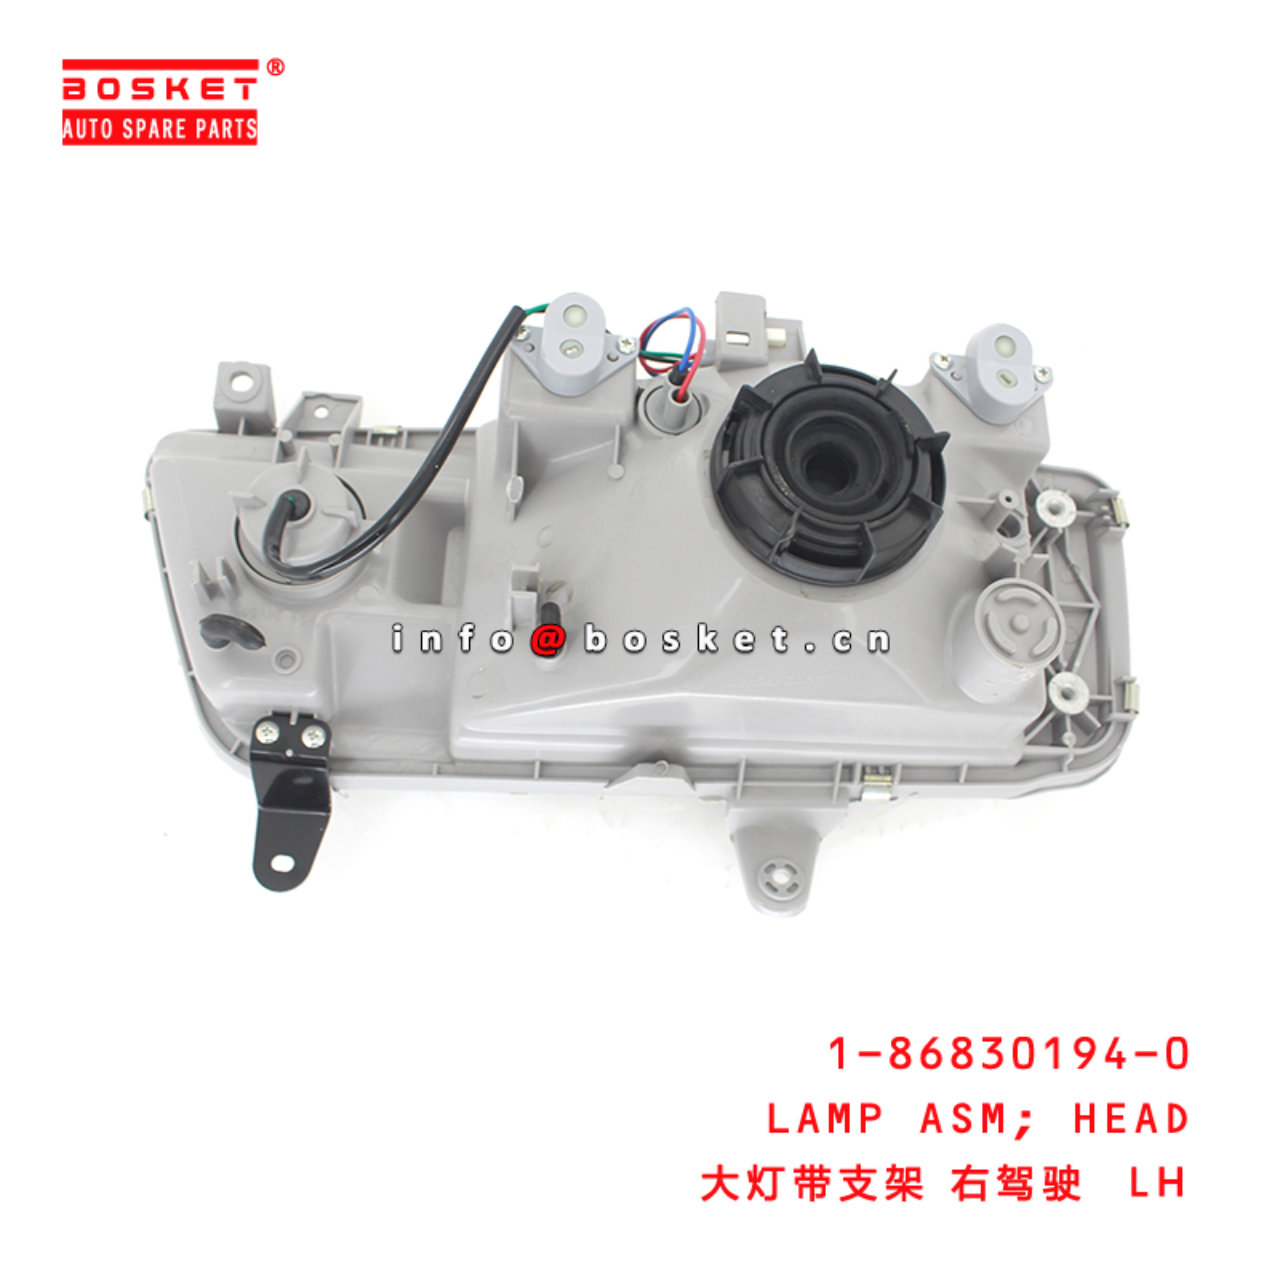 1-86830194-0 Head Lamp Assembly suitable for ISUZU FVR 1868301940